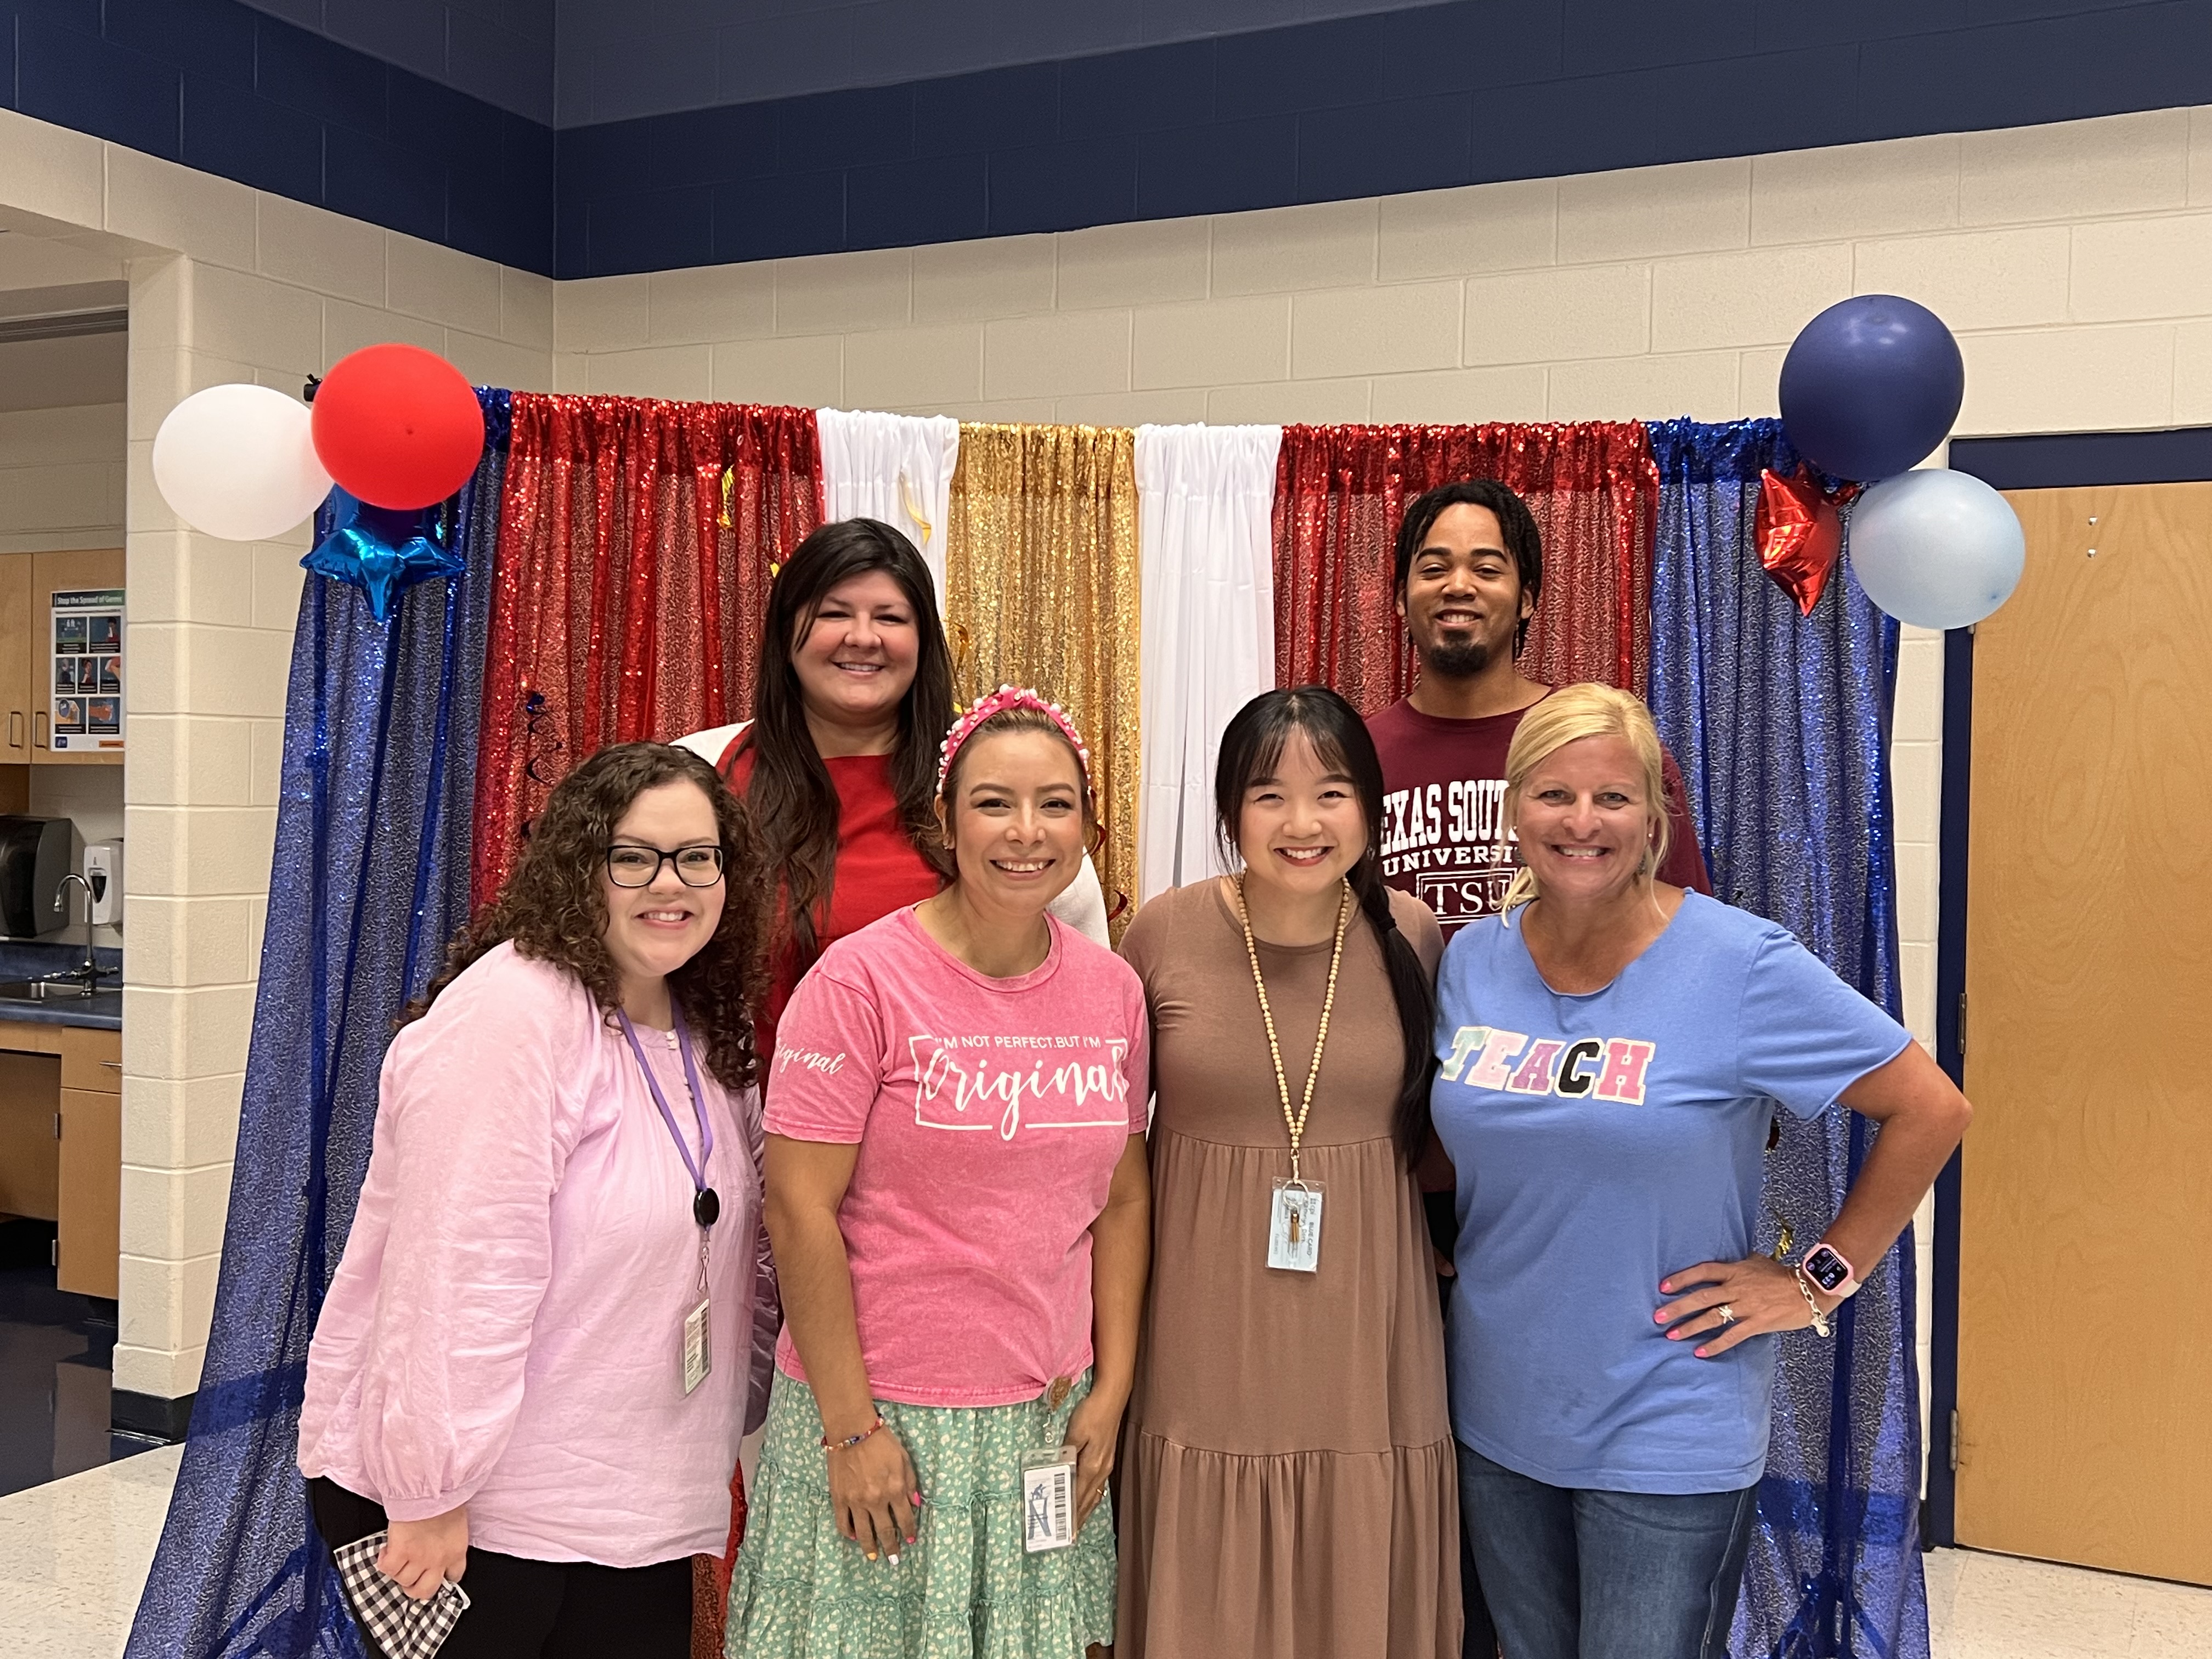 Ms. Hanhart, Ms. Riedl, Ms. Fregeau, Ms. Finley, Ms. Lindsey, Mr. McCulloch, on a rainbow background smiling and happy to teach second grade Ms. Dore